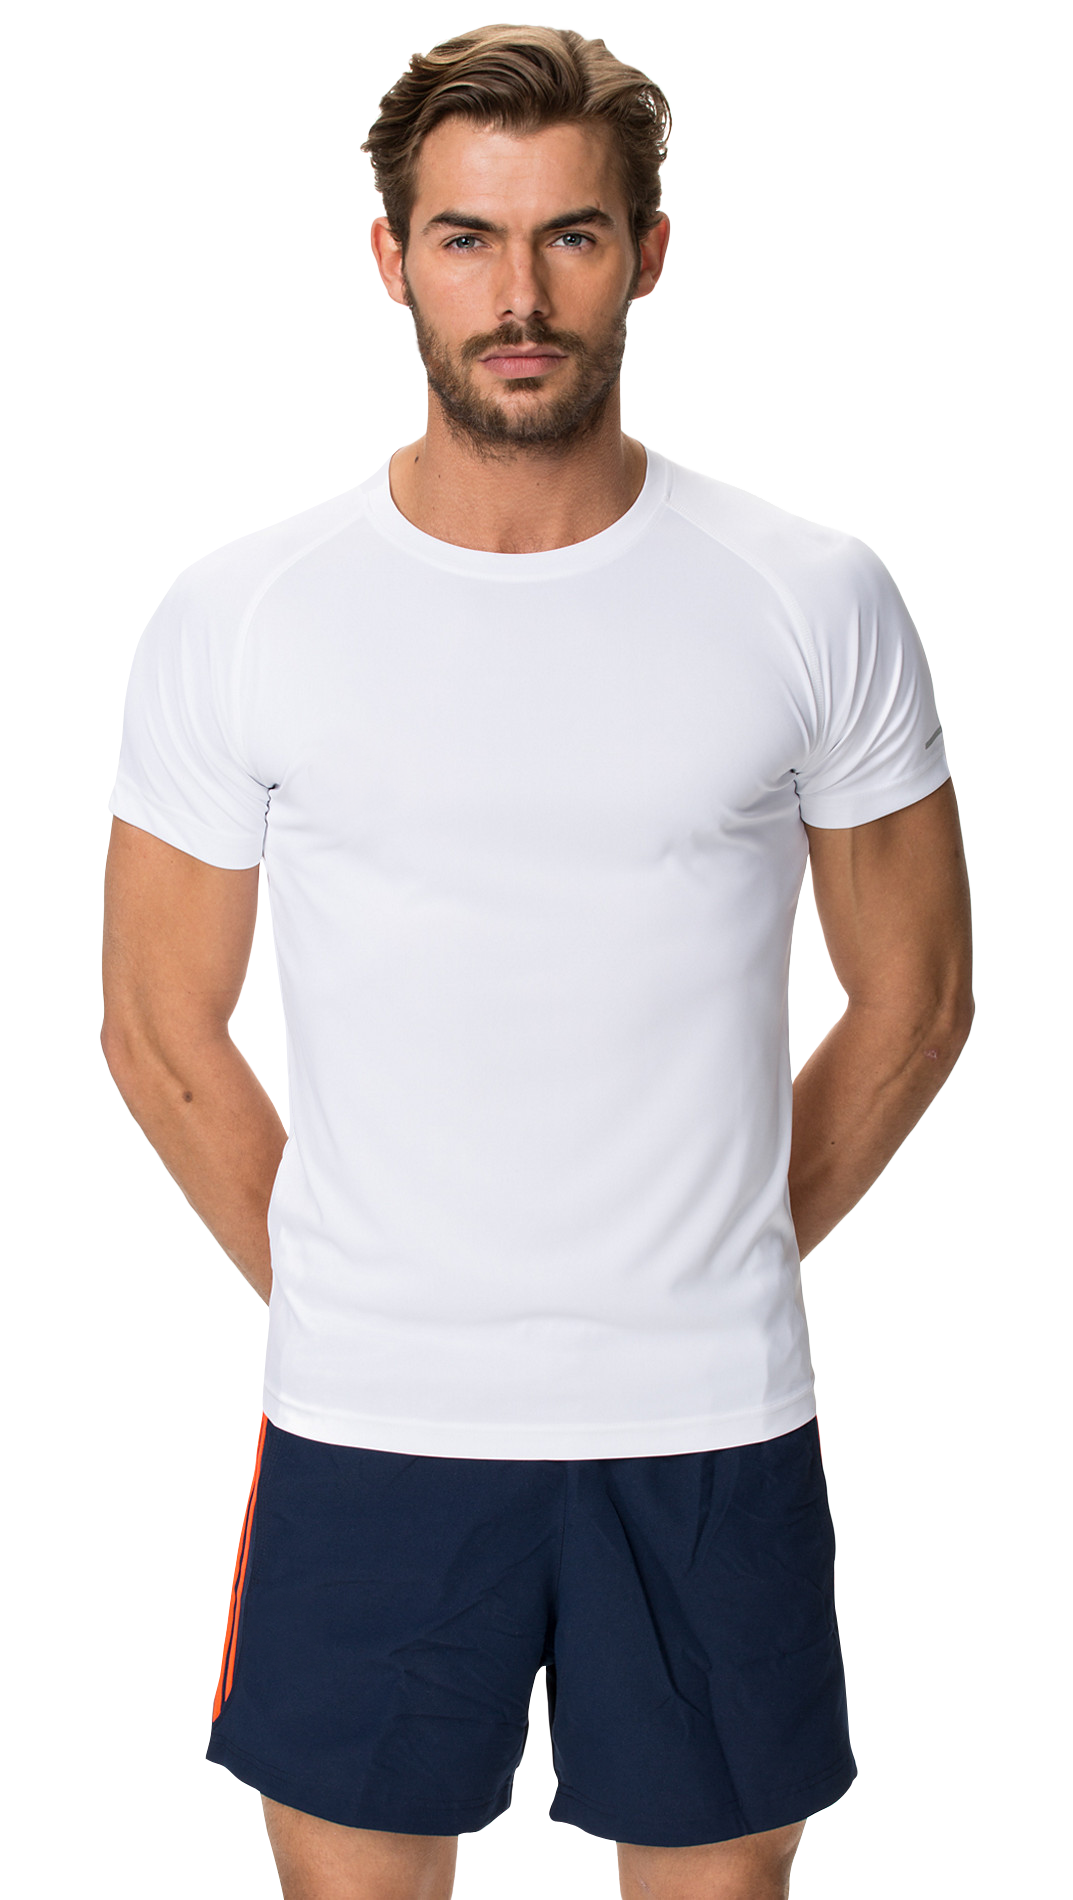 White Tshirt PNG Image - PurePNG, Free transparent CC0 PNG Image Library